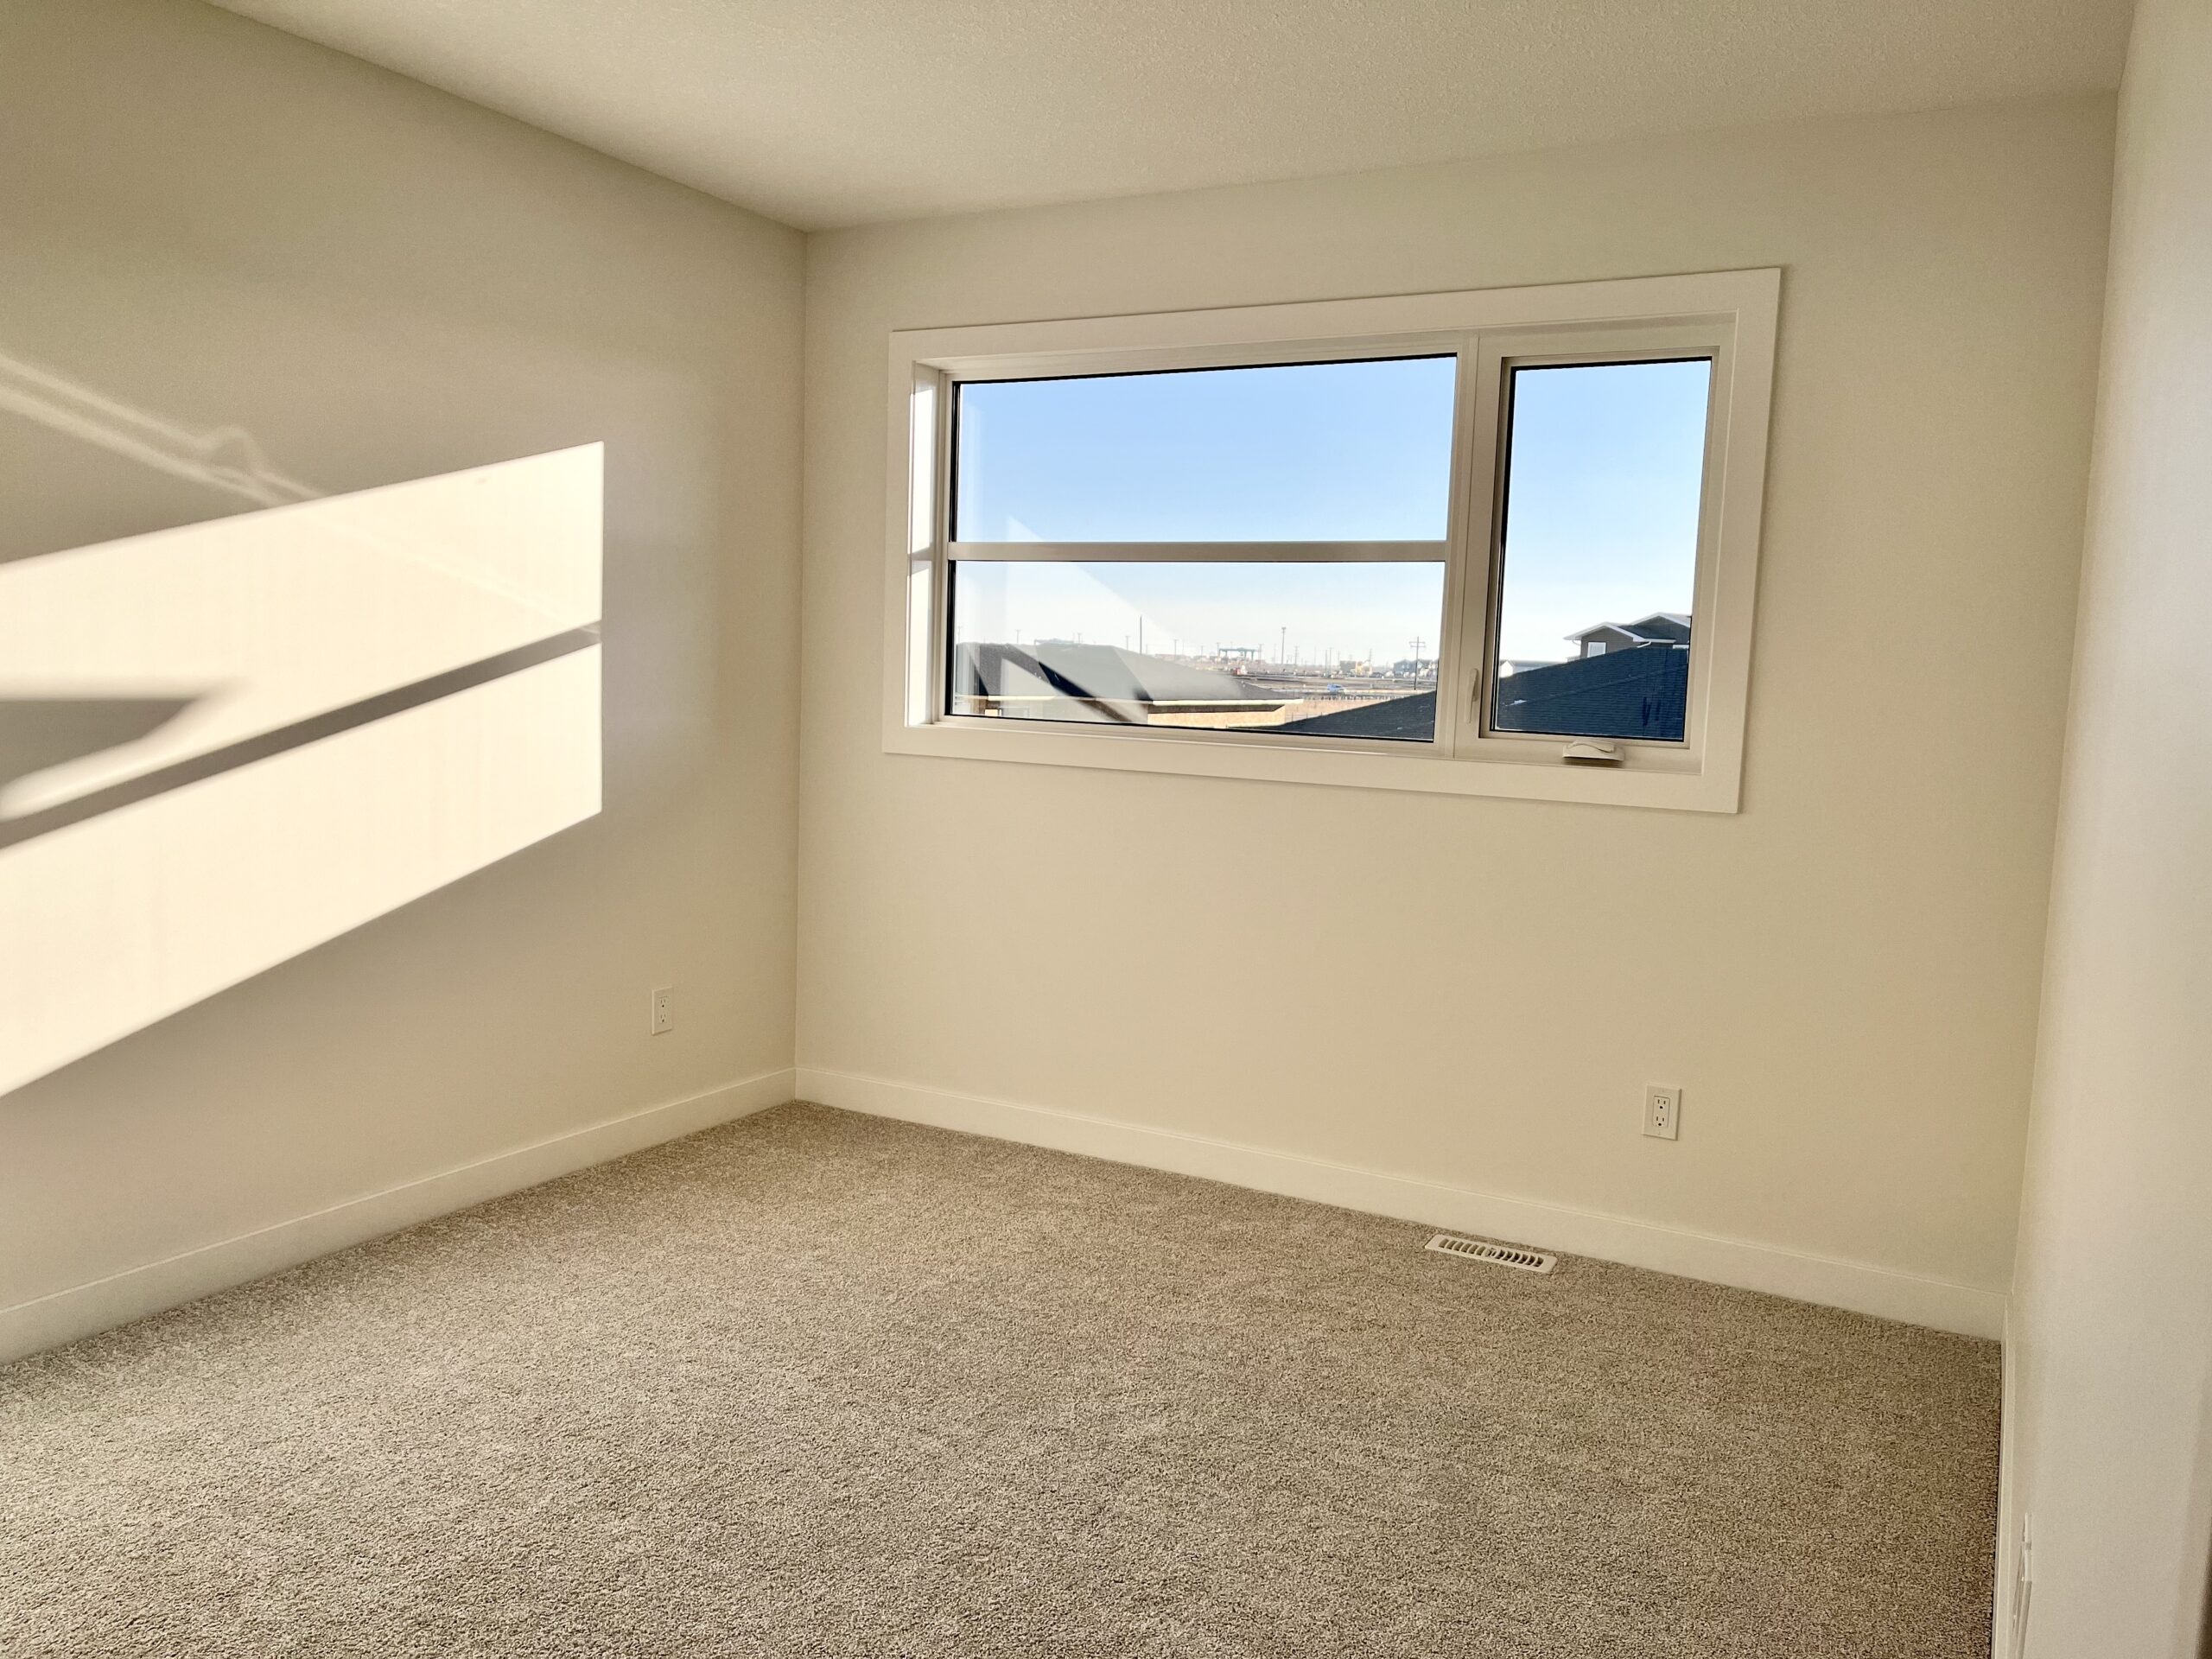 A room with a window and carpet.